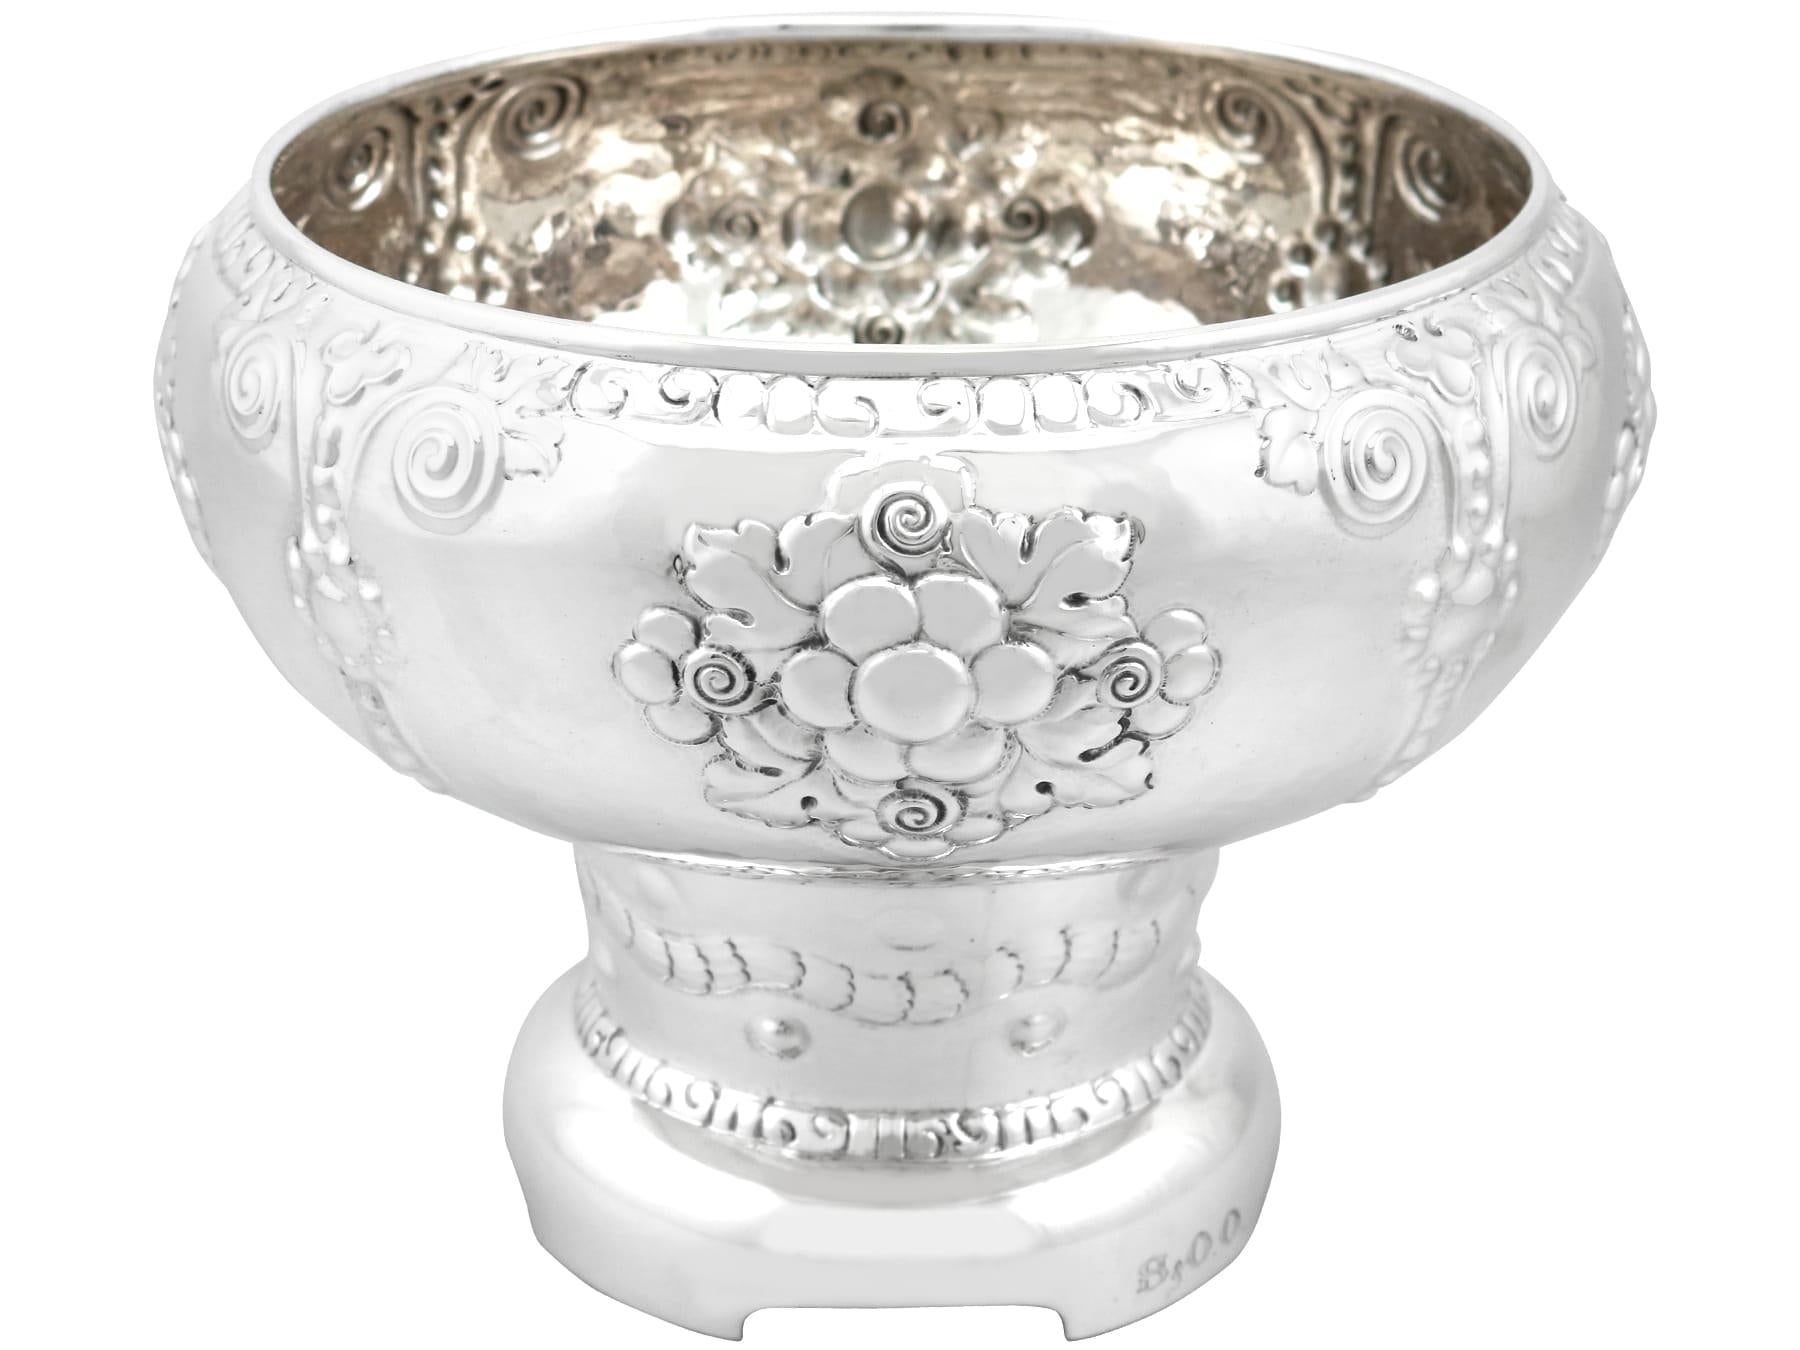 A fine and impressive antique Norwegian silver presentation bowl; an addition to our presentation silverware collection.

This fine antique Norwegian silver presentation bowl has a circular rounded form onto a cylindrical pedestal and circular